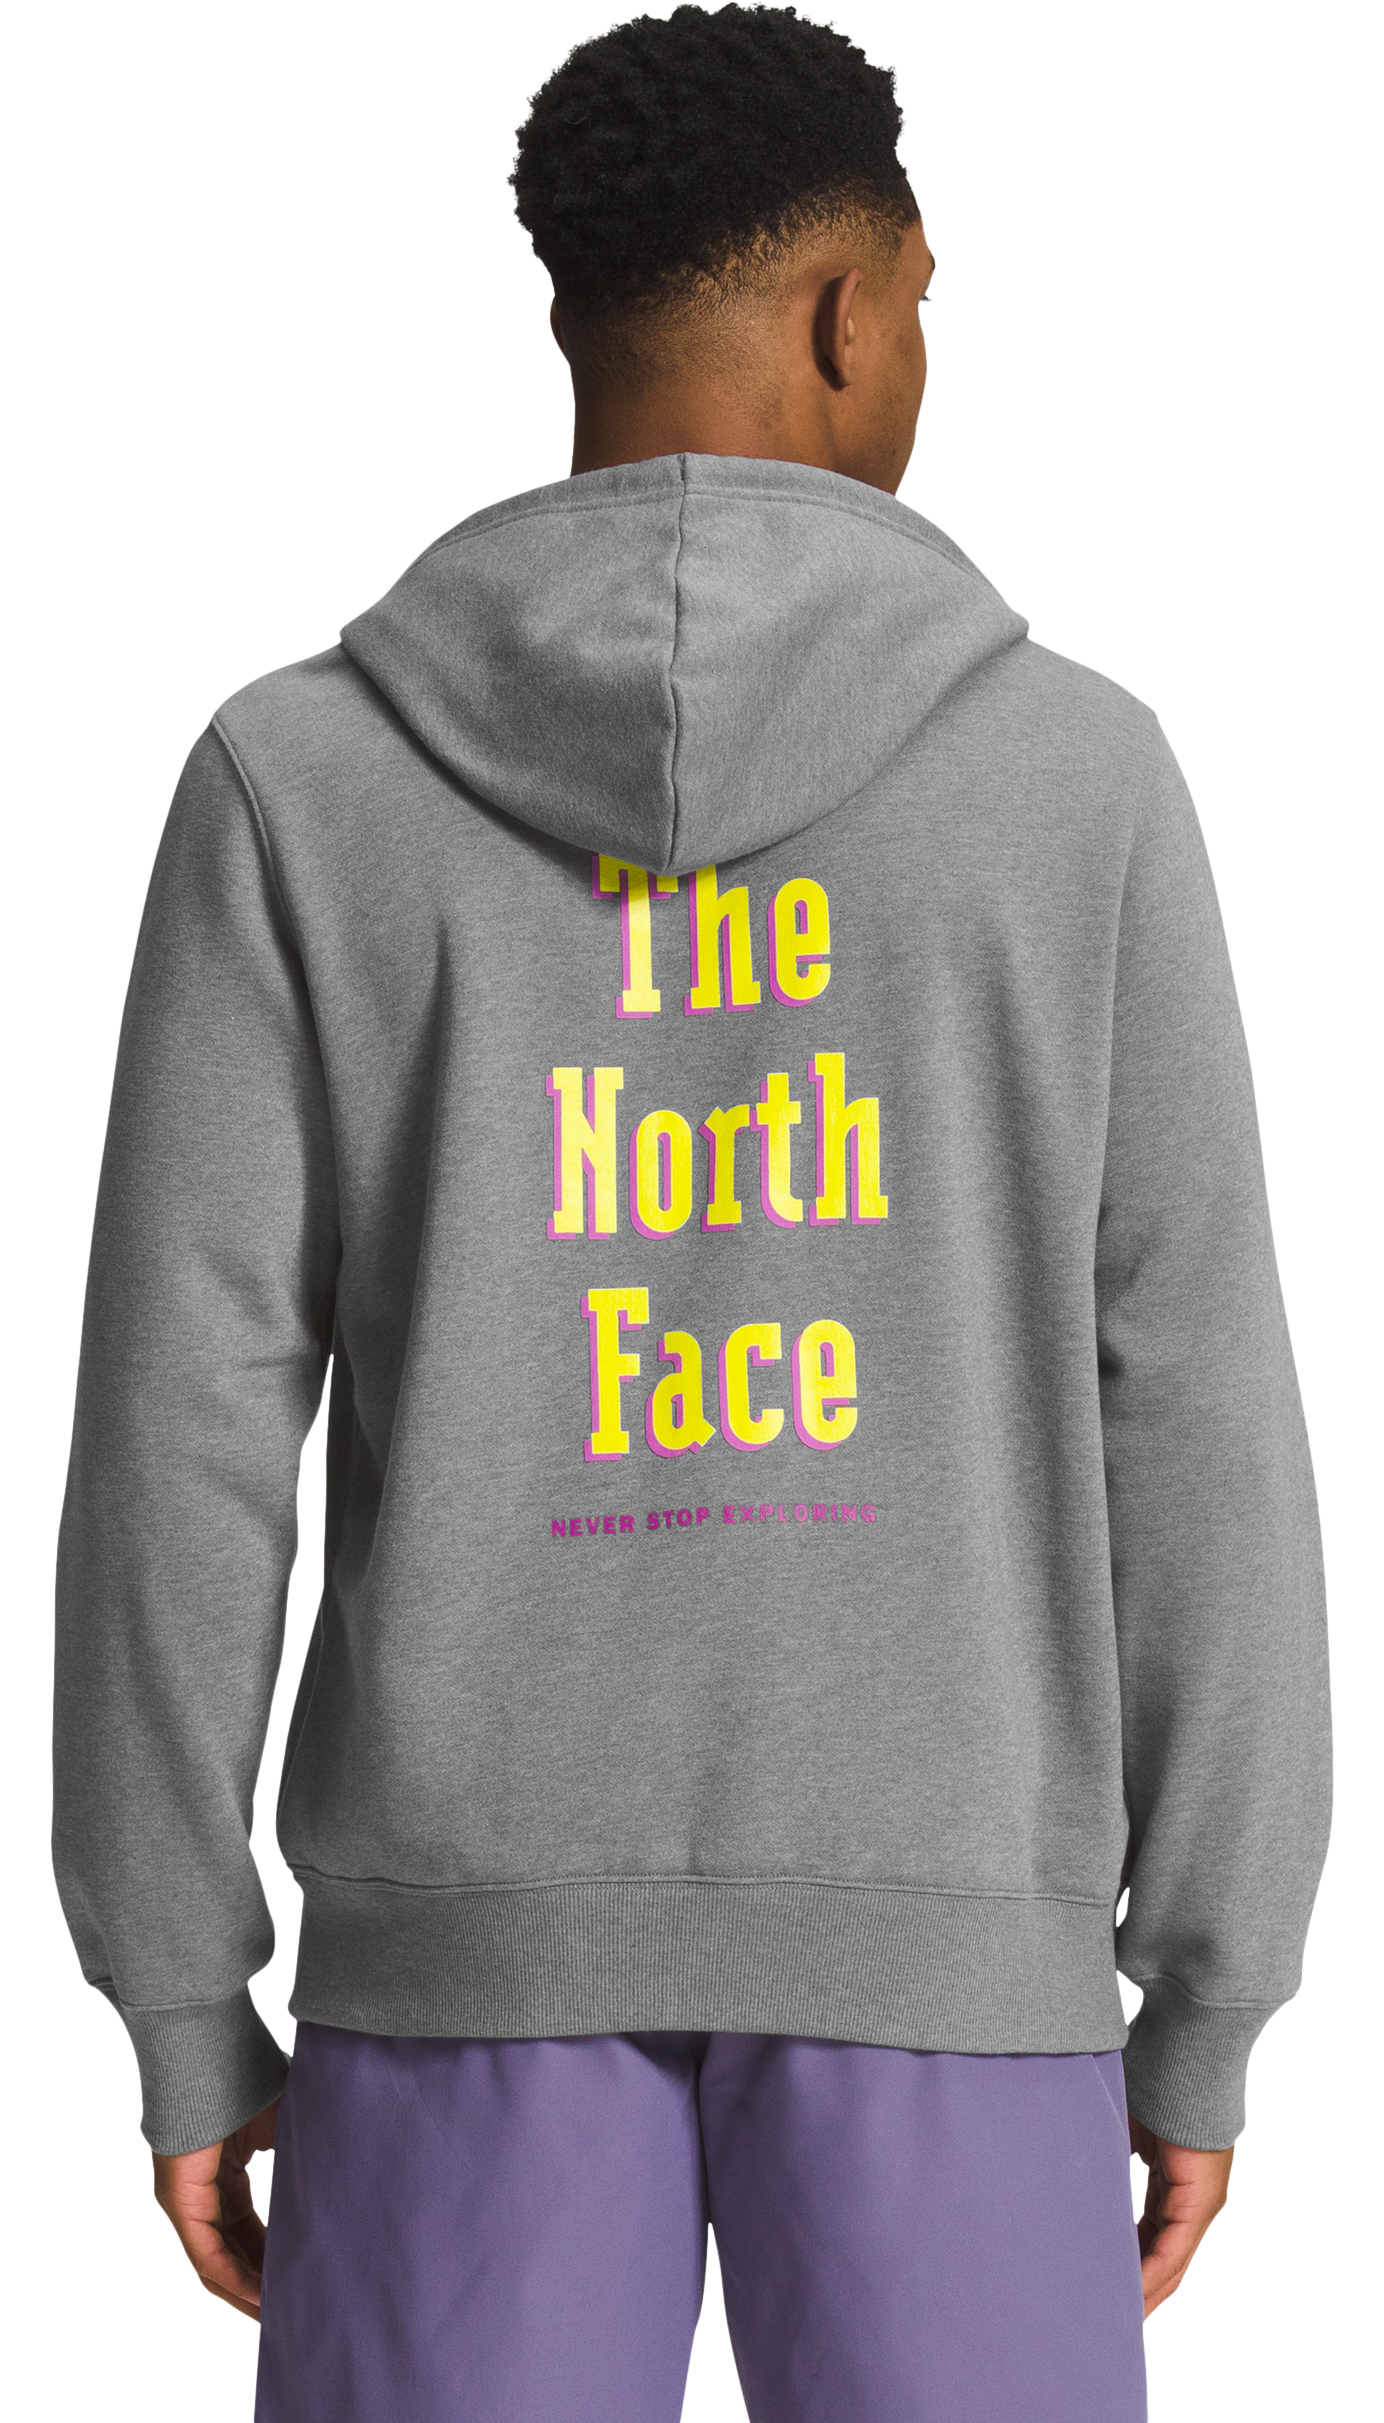 The North Face Brand Proud Long-Sleeve Hoodie for Men - TNF Medium Grey Heather - M